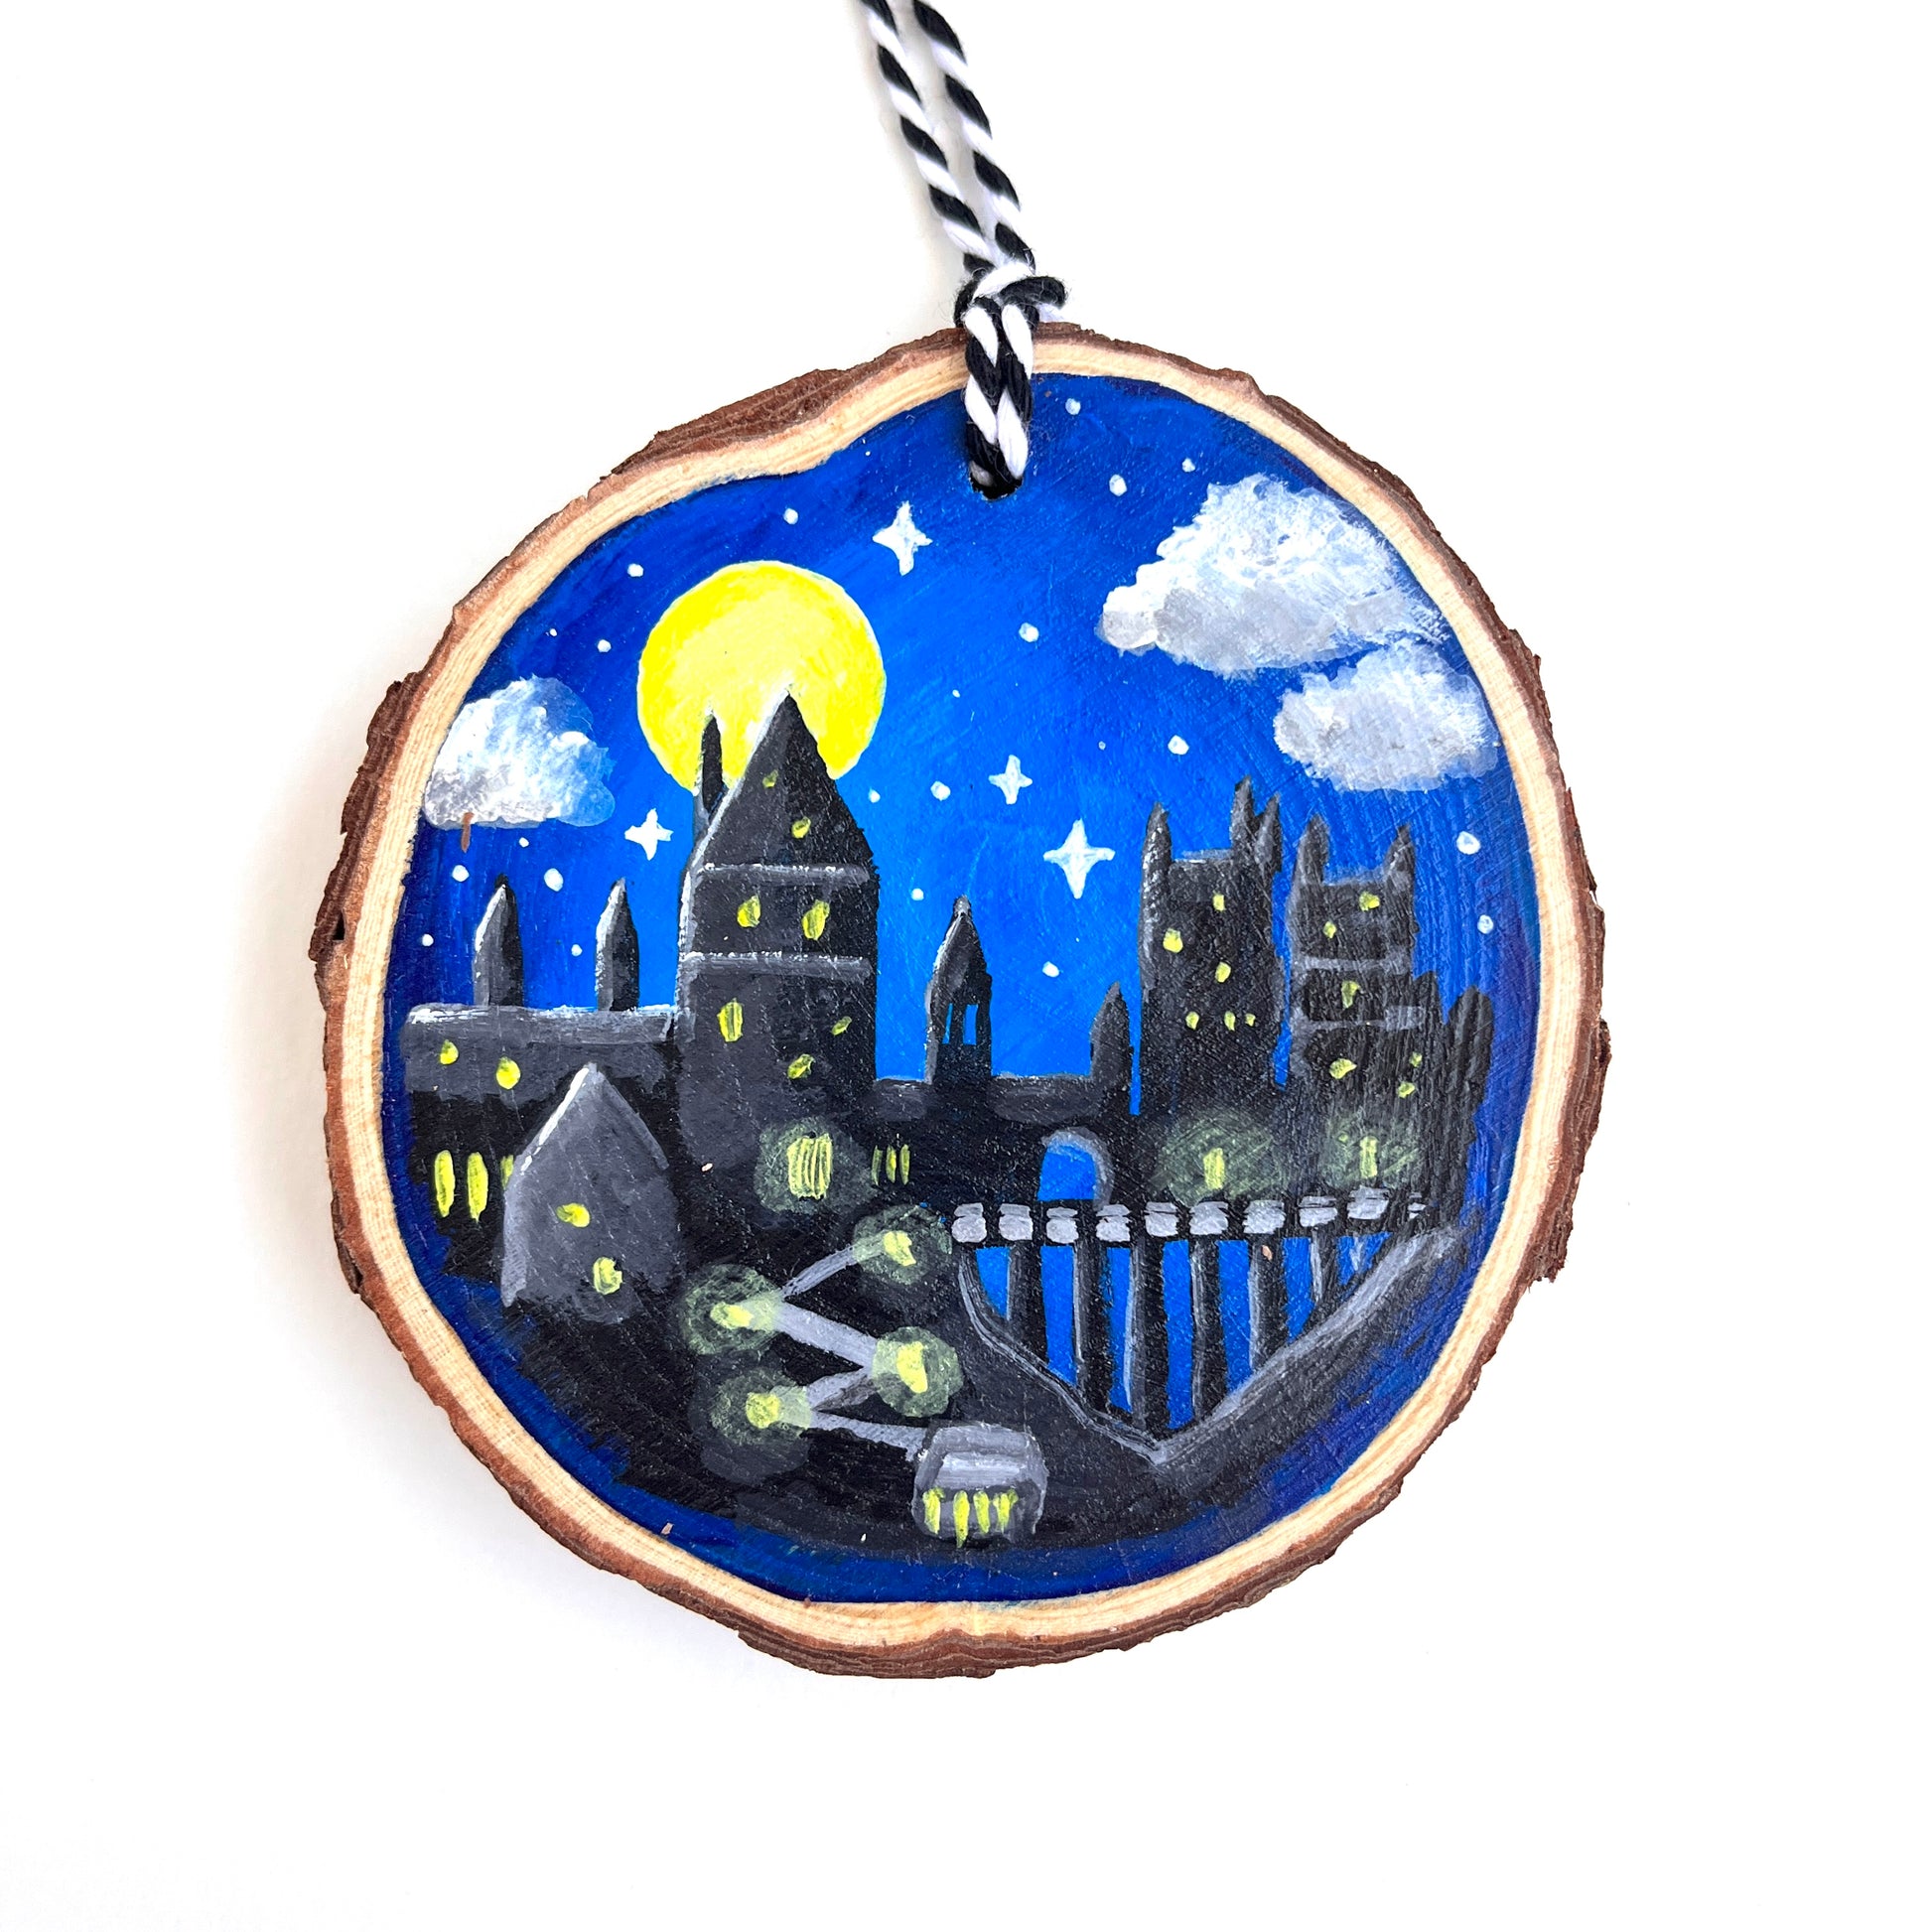 A hand painted wooden ornament of the Hogwarts castle from Harry Potter.  A full moon rises behind the Gryffindor tower.